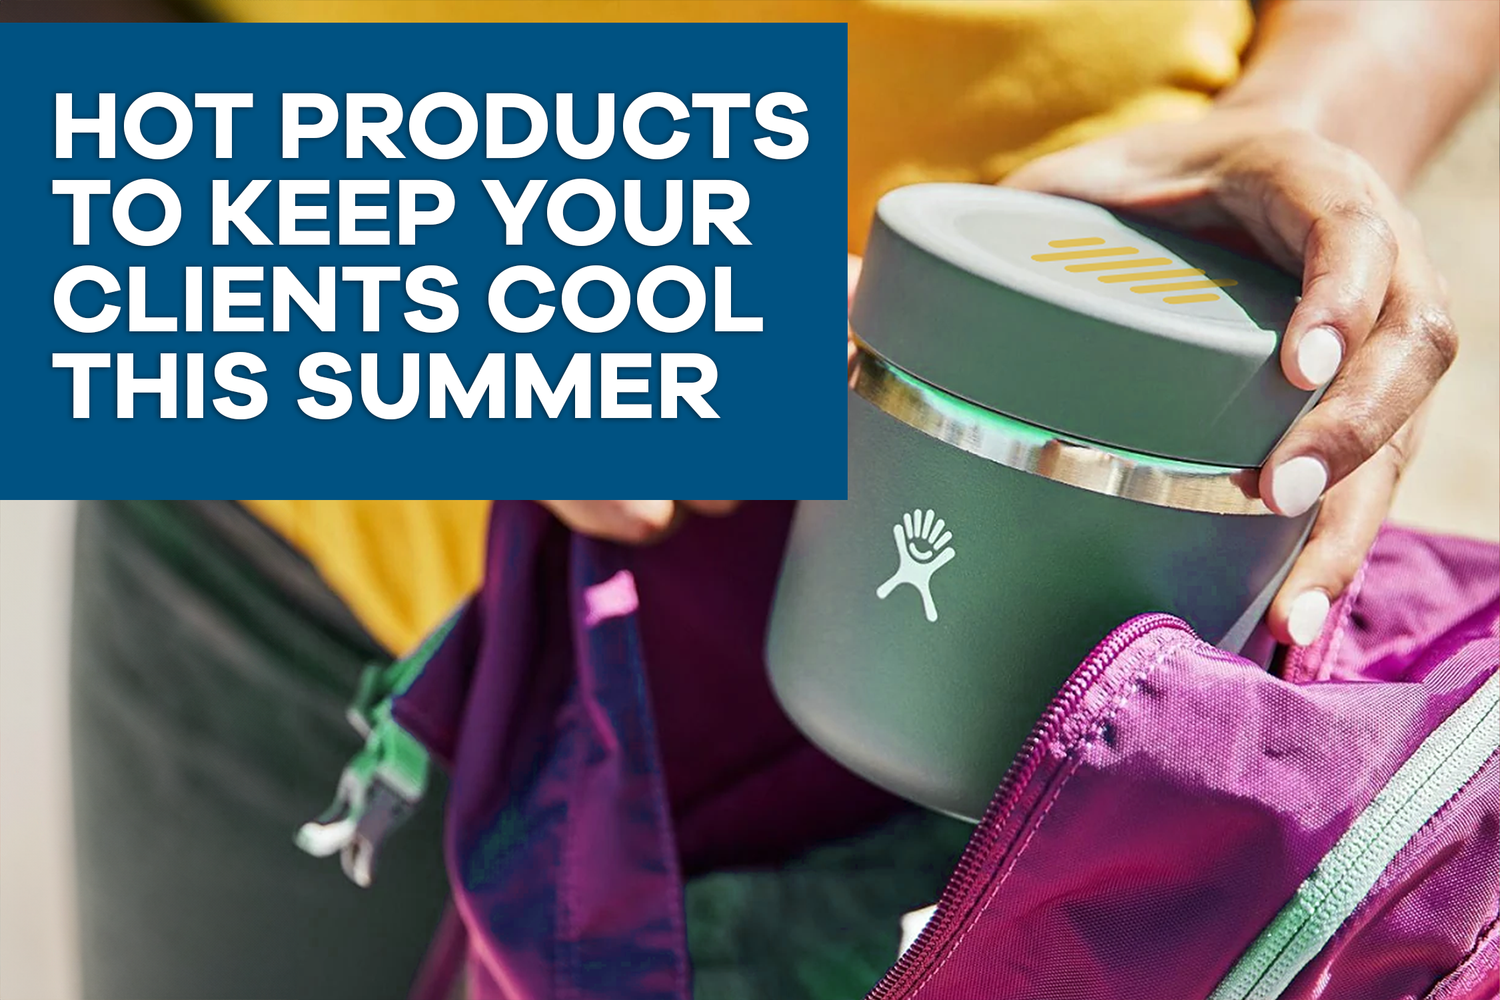 Hot Products to Keep Your Clients Cool This Summer